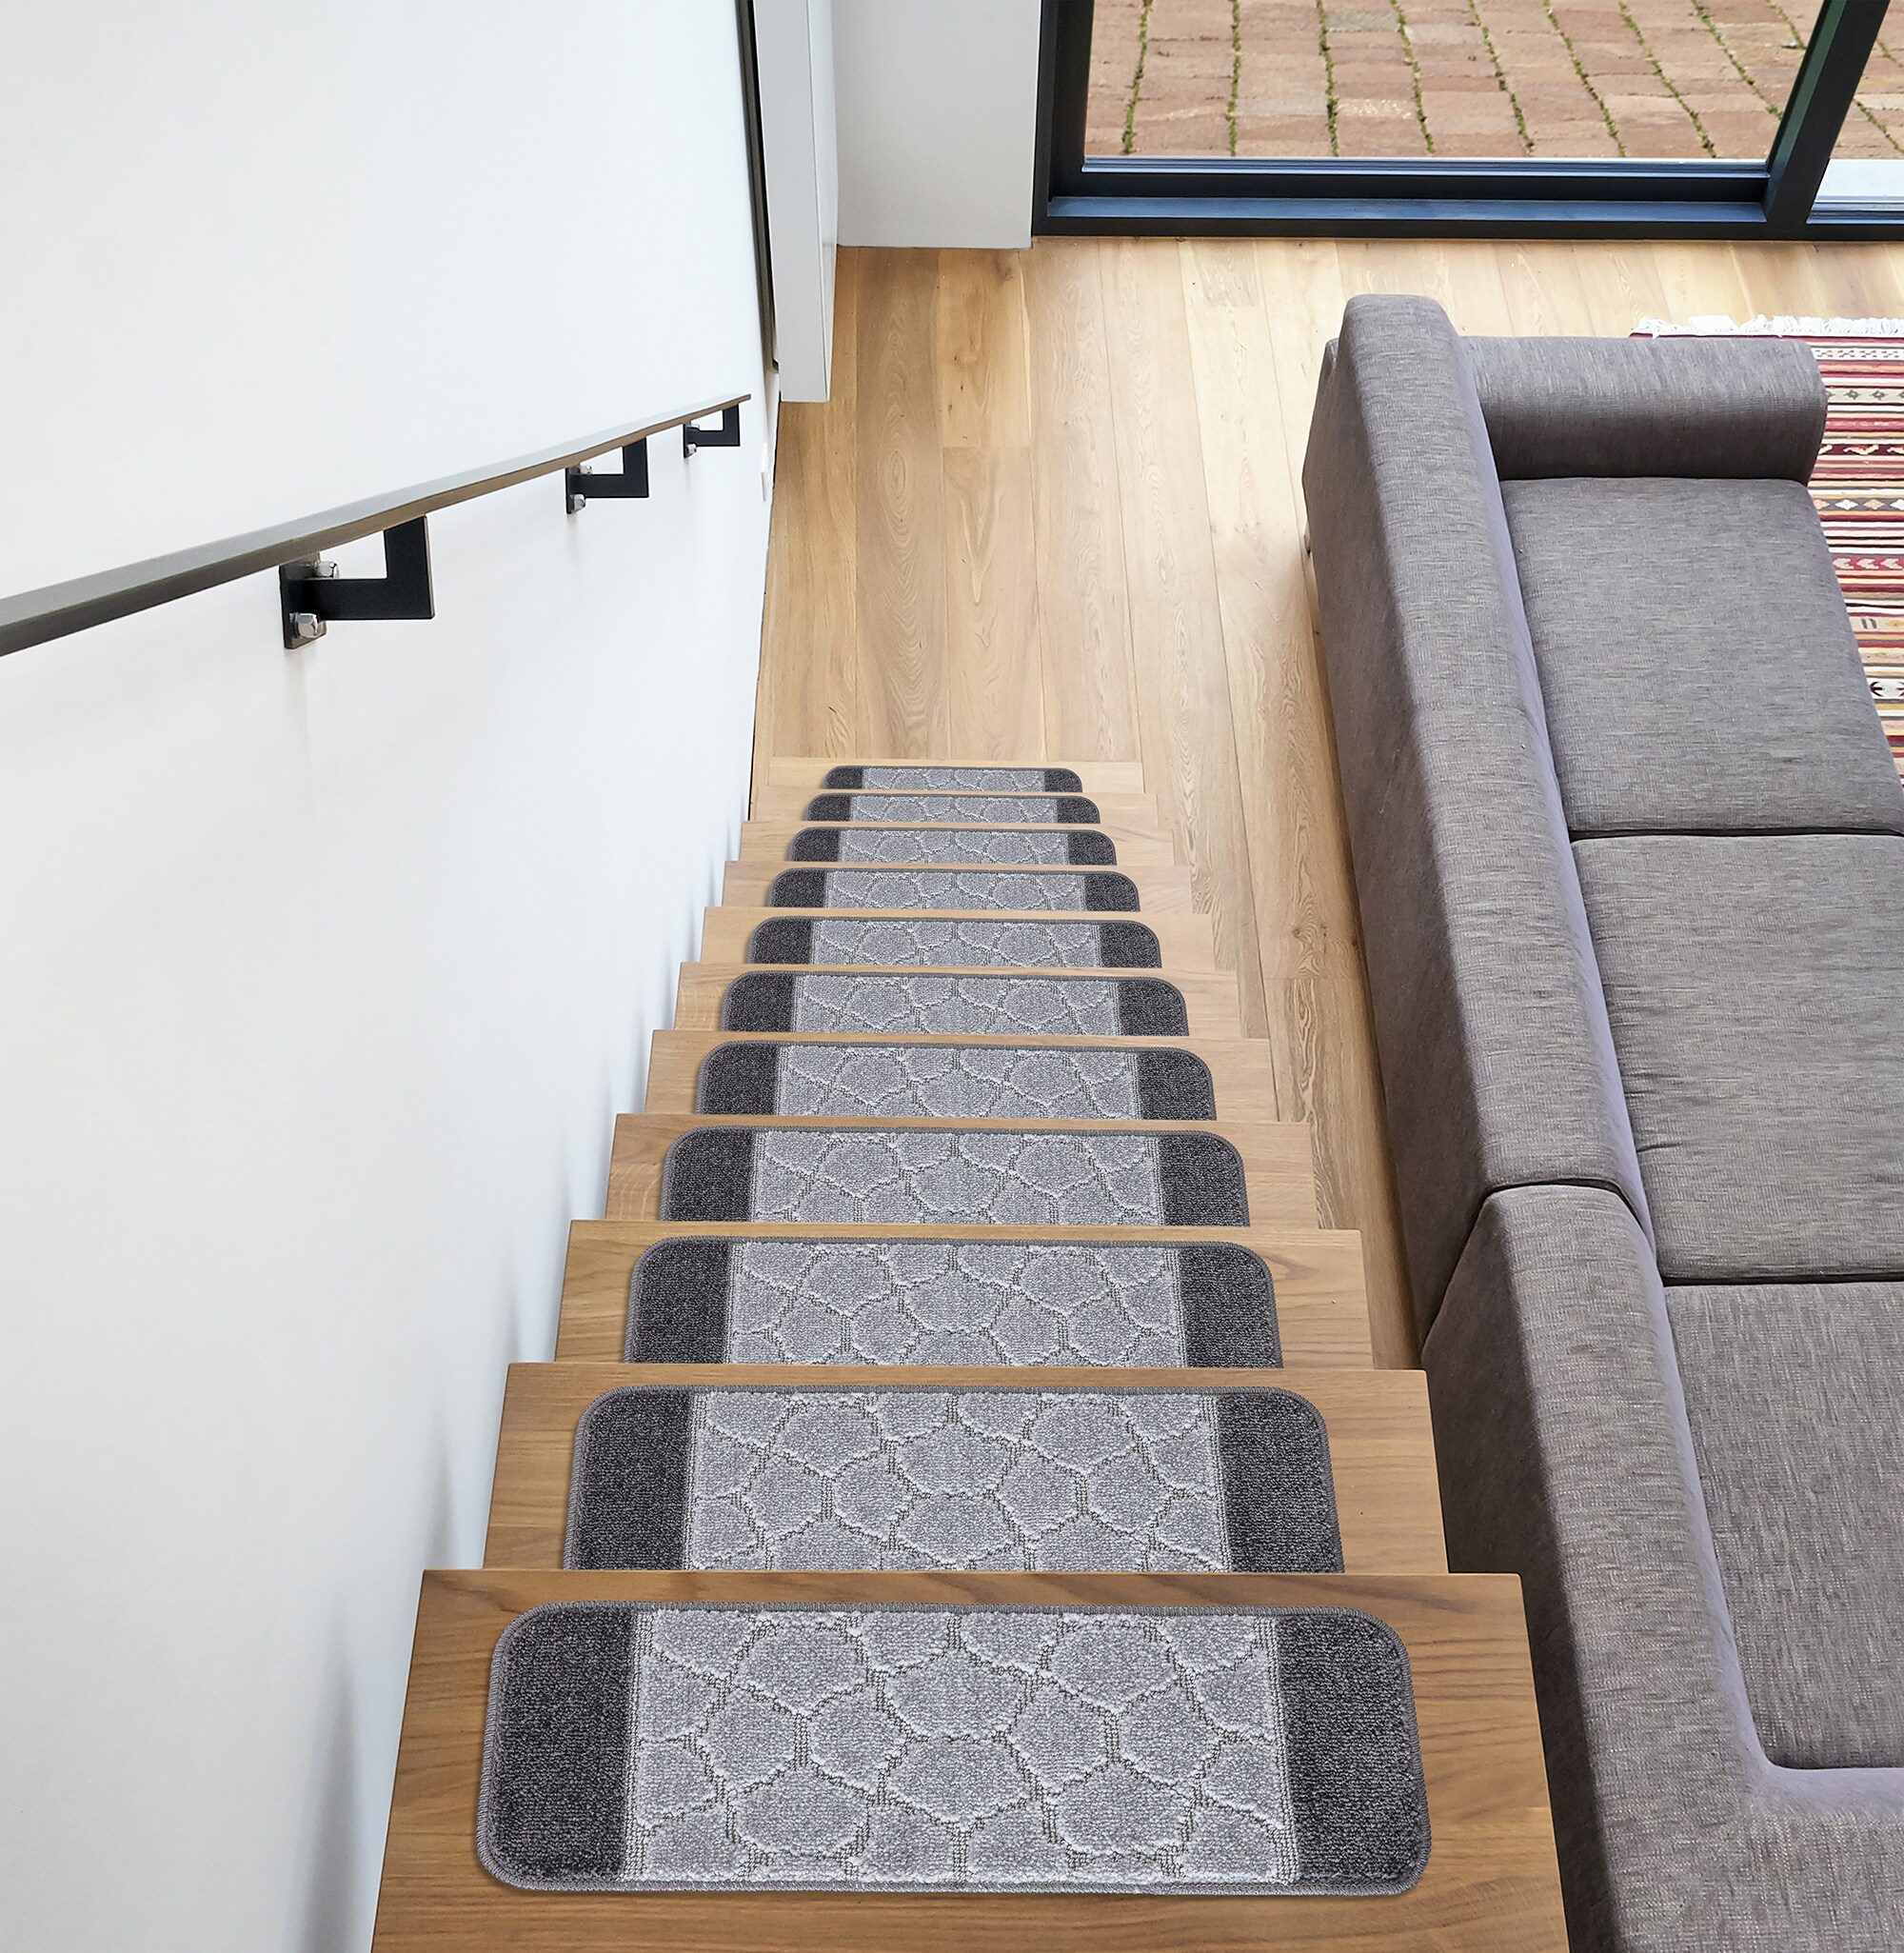 30mm Thickness Grey, 15 Soft Shaggy Carpet Stair Treads NON-SLIP MACHINE WASHABLE Mats/Rugs 22x67cm